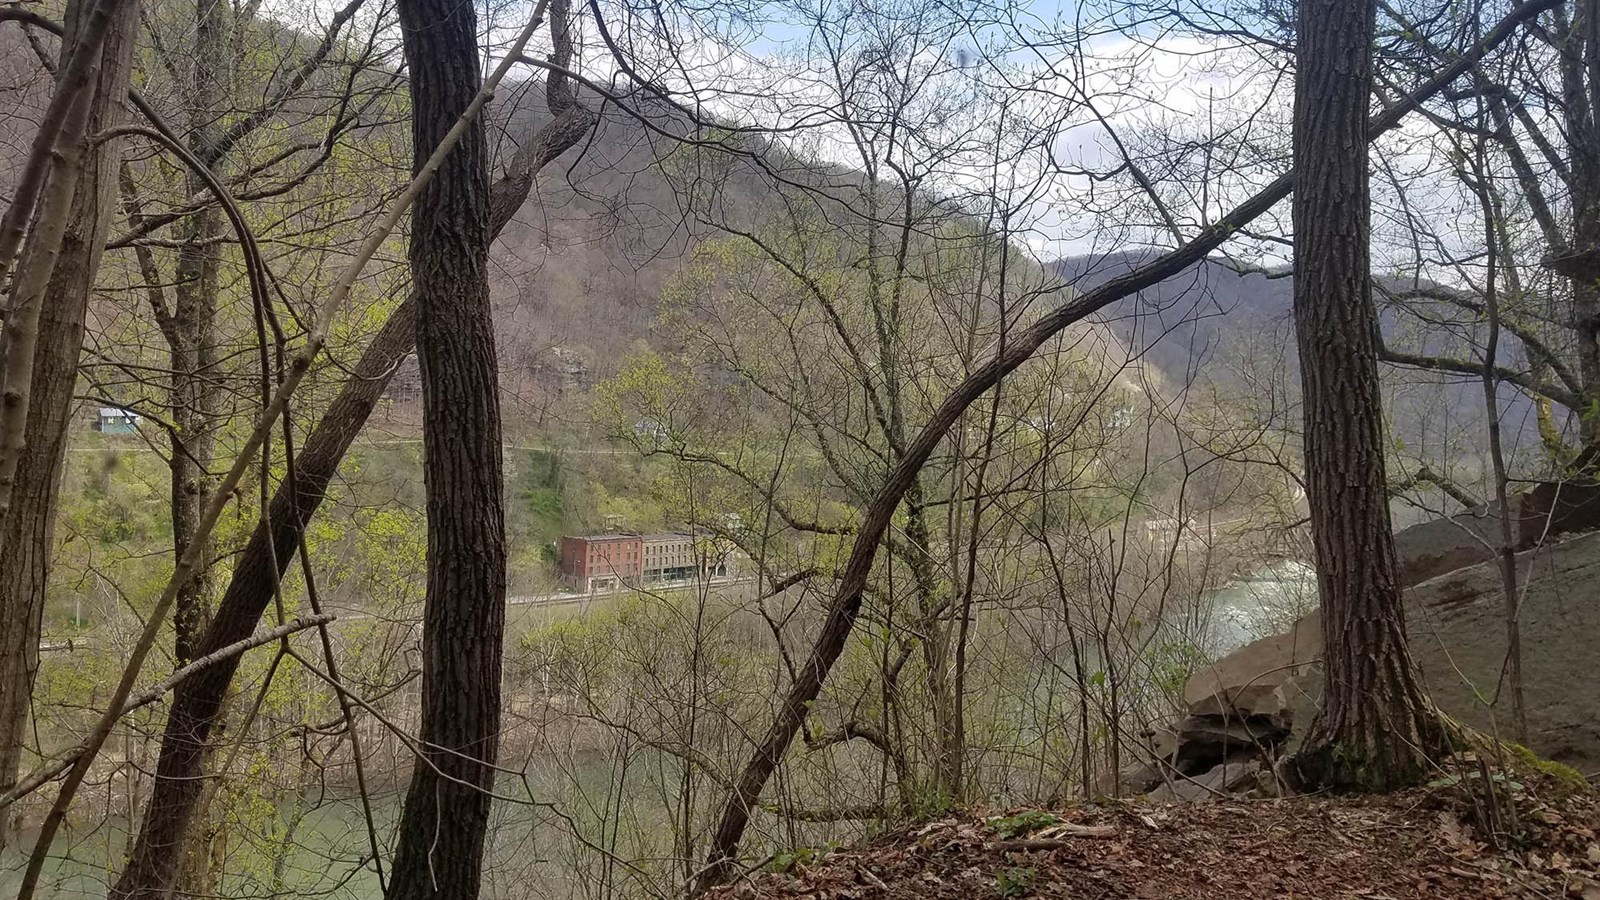  A view through the trees overlooking the town of Thurmond from across the river.